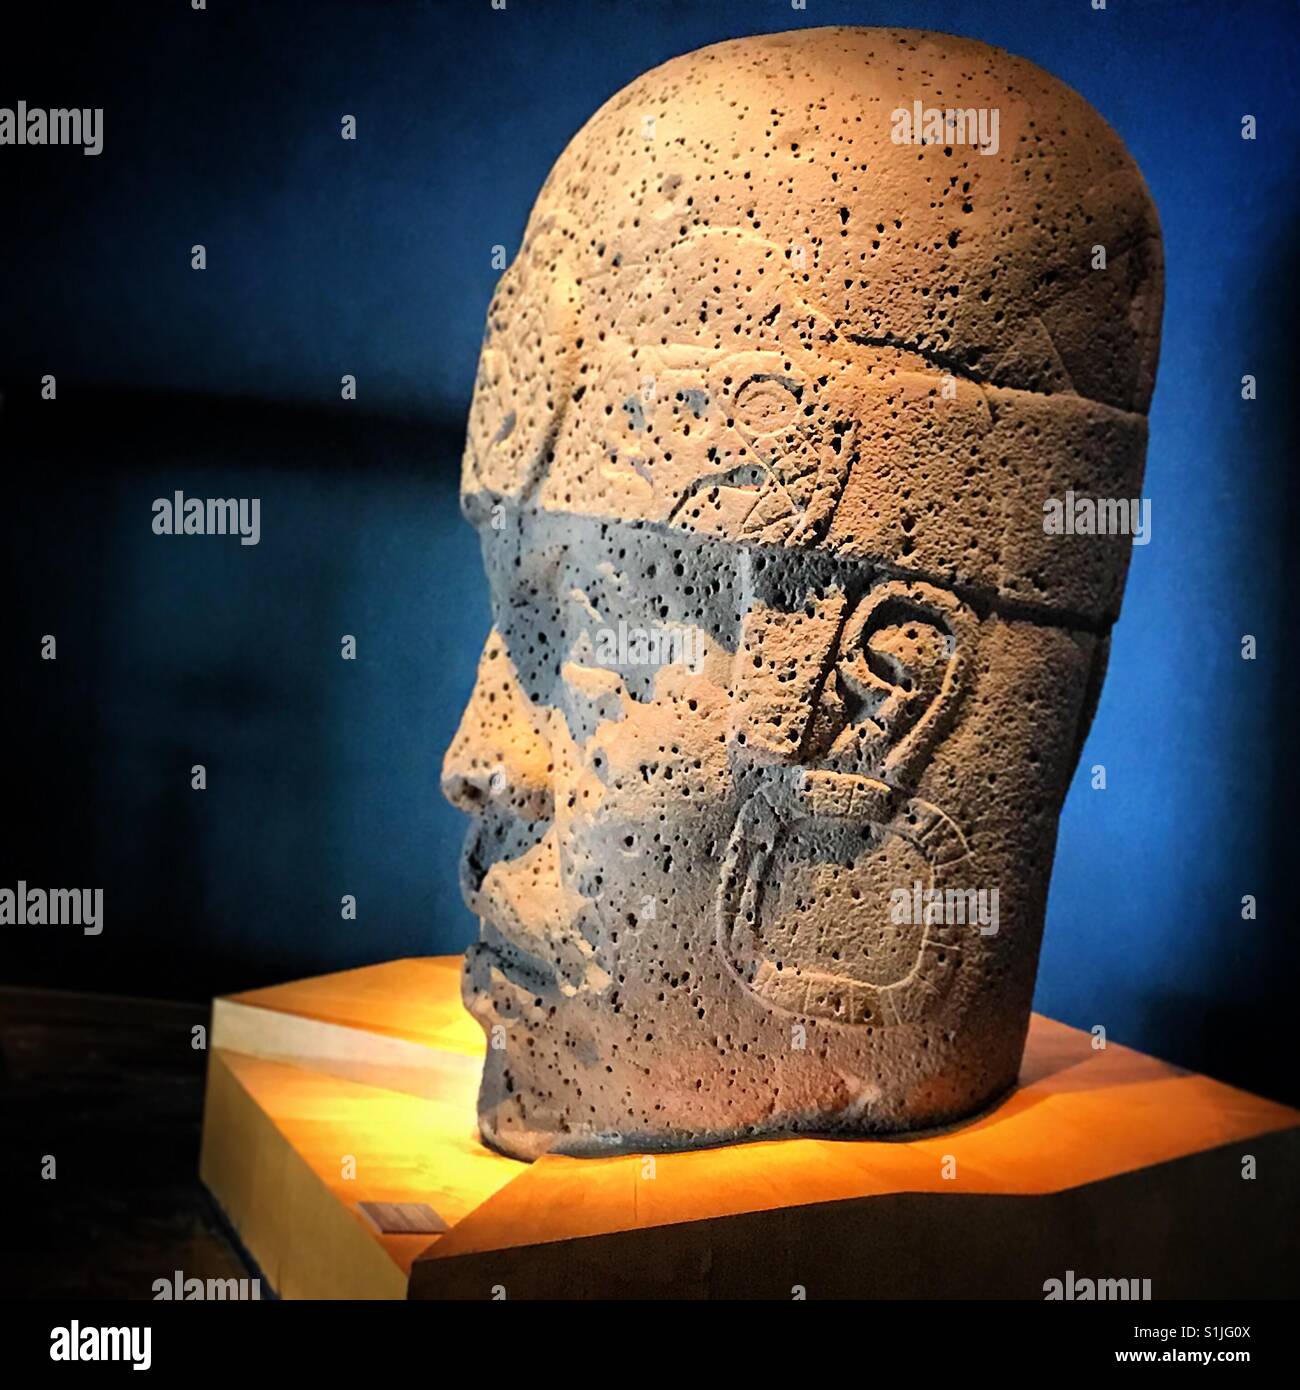 A giant head displayed in the Olmec room of the Museo Nacional de Antropologia in Mexico City, Mexico Stock Photo